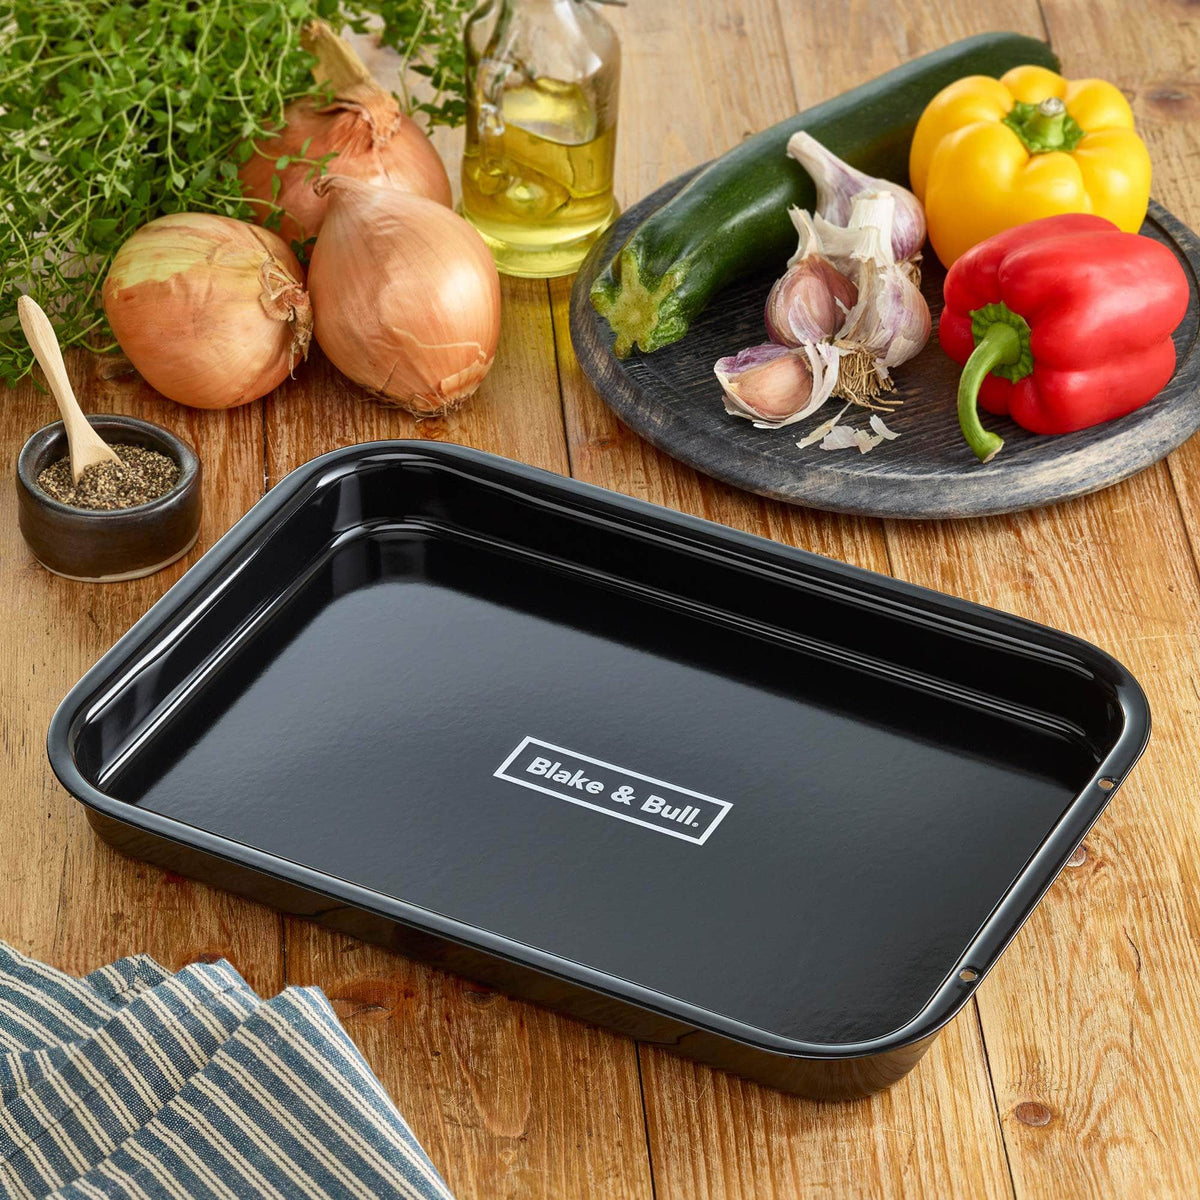 &#39;Fits on runners&#39; black enamelled tray bake for use with Aga range cookers &#39;half oven&#39; size